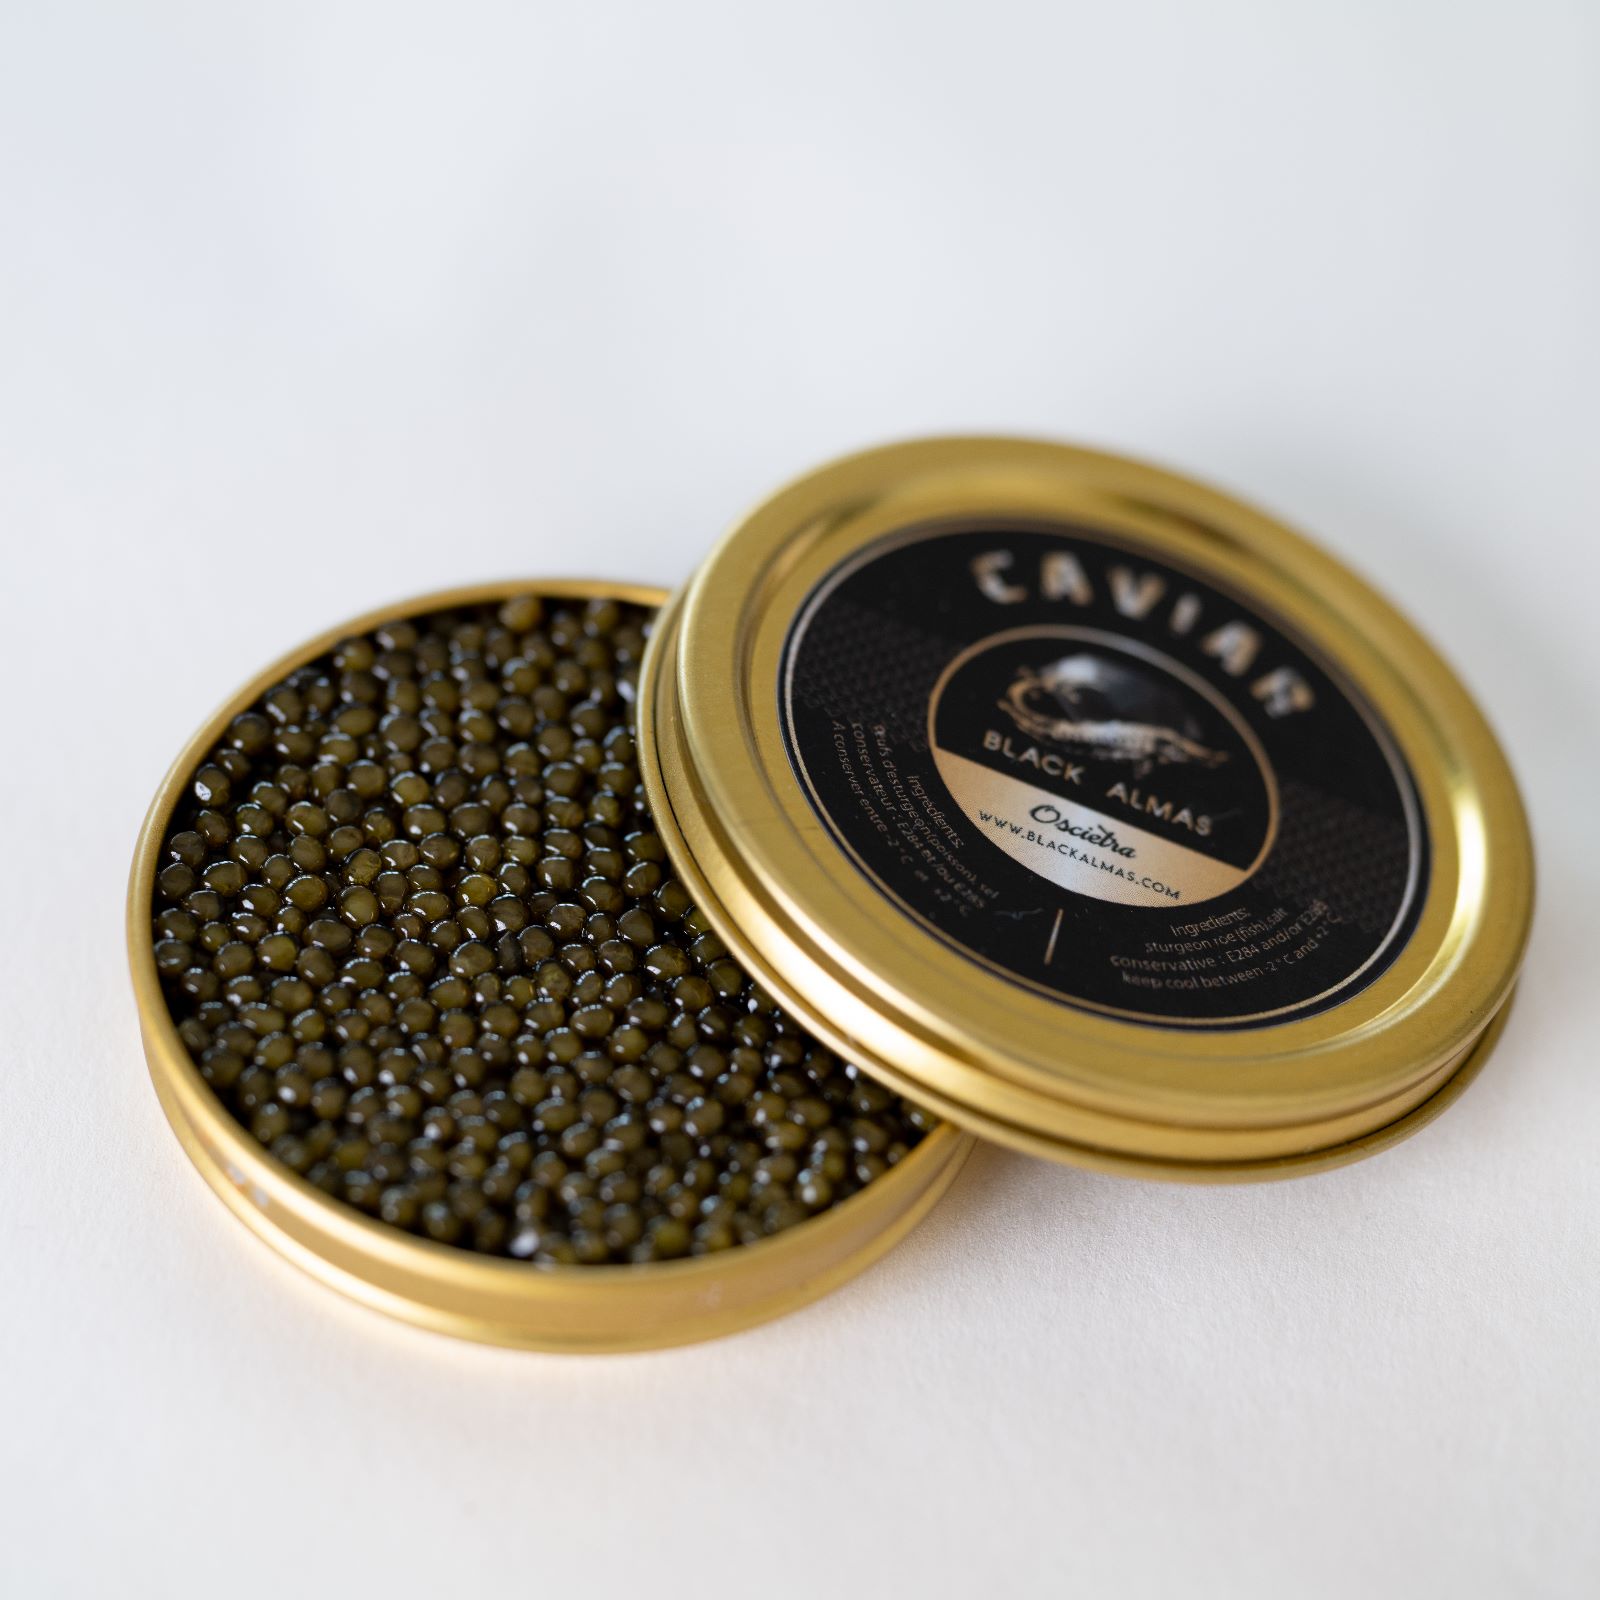 Best place to buy an excellent caviar | Paris Select - Gift boxes